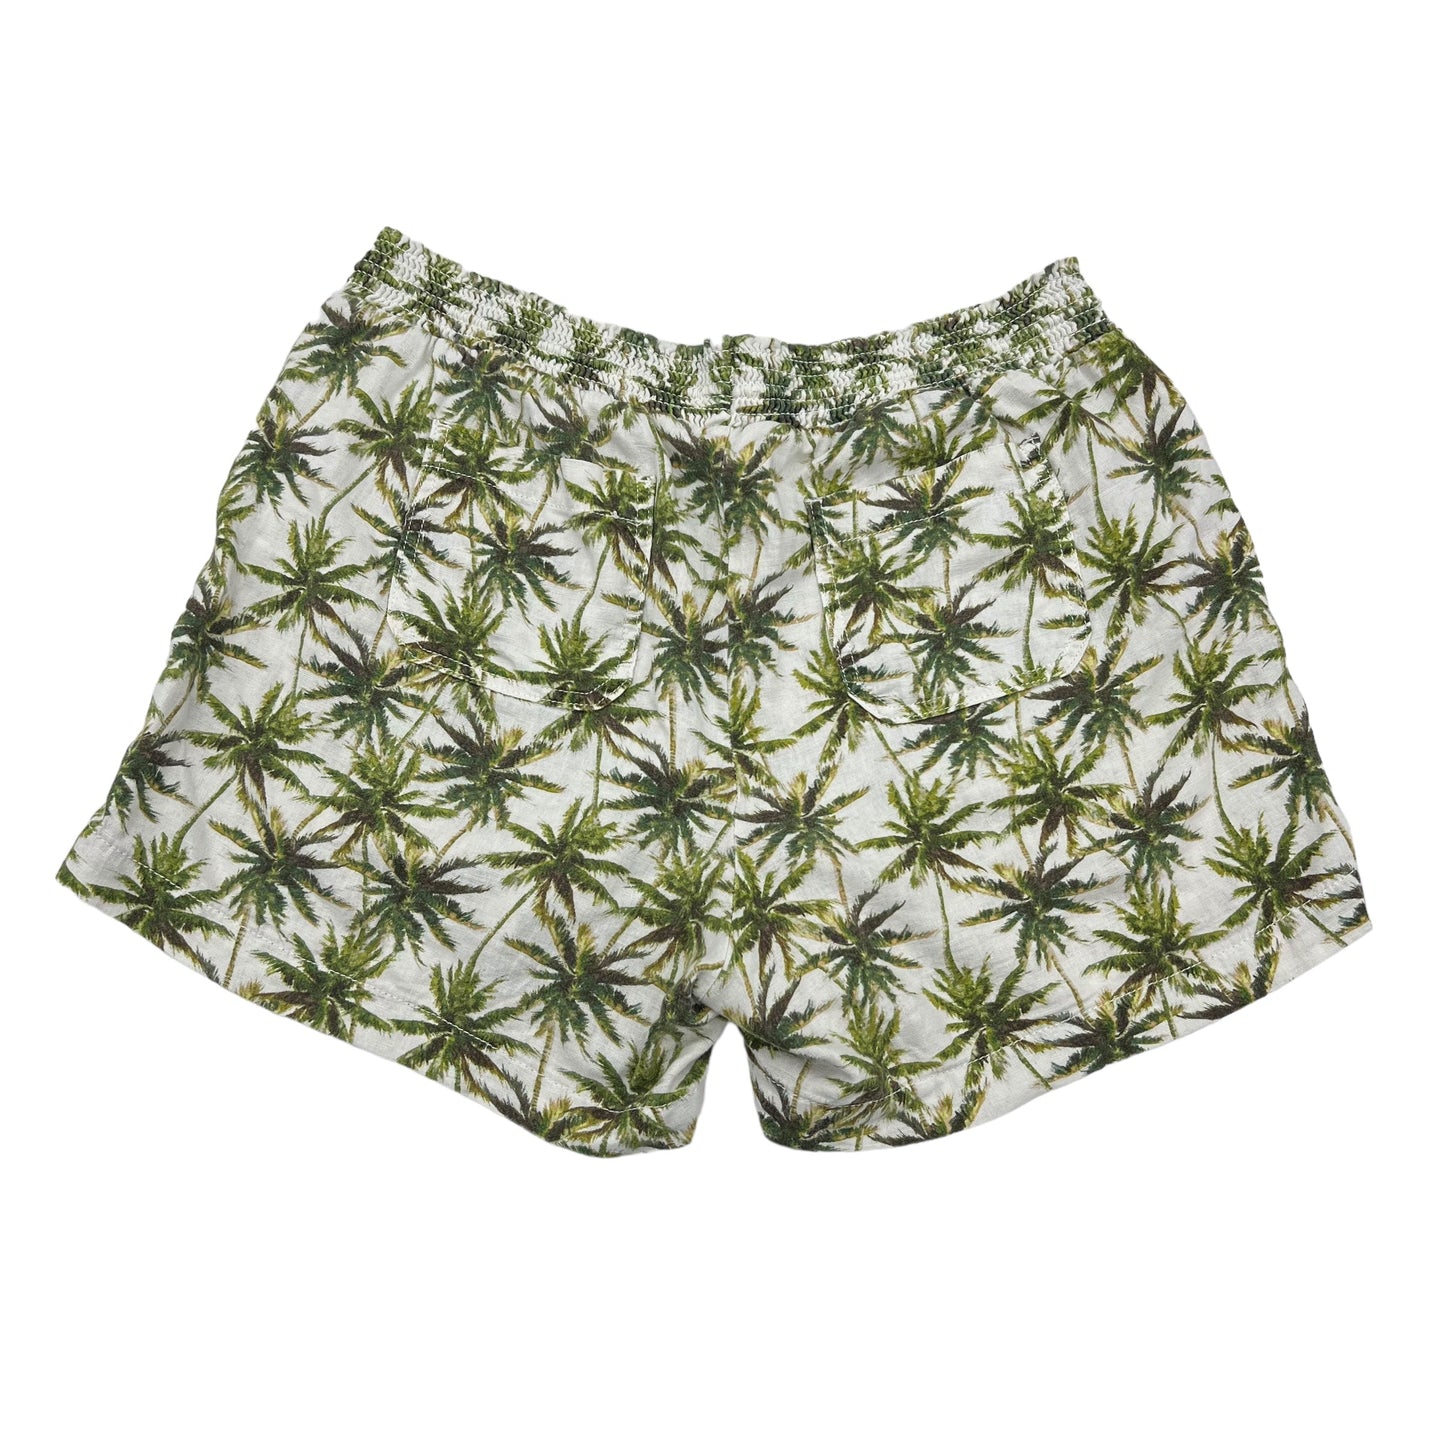 GREEN SHORTS by BRIGGS Size:L